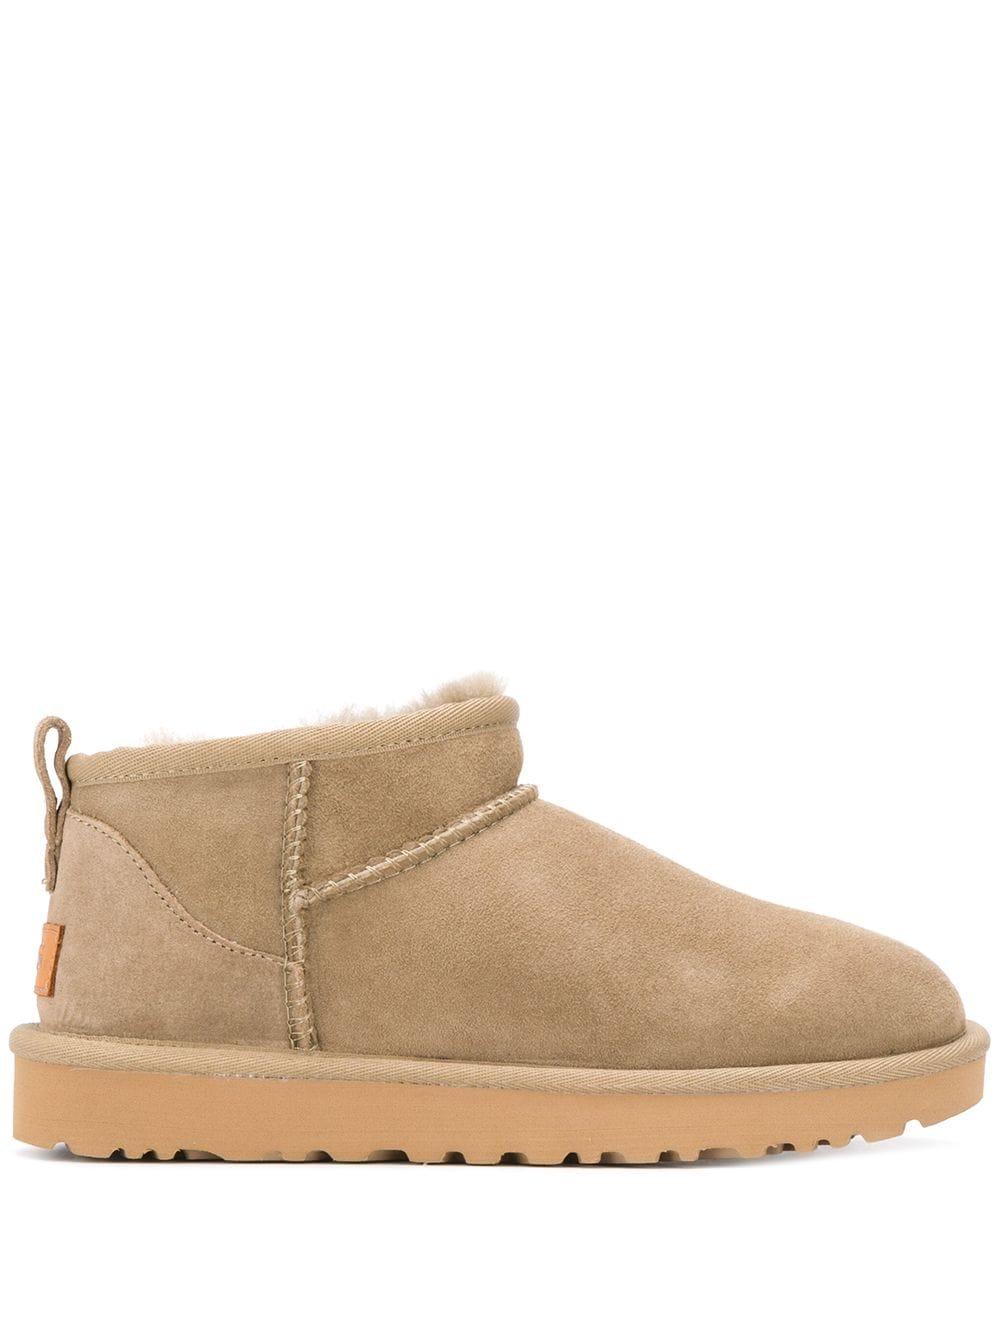 UGG Leather Classic Ultra Mini Boot Antilope in Beige (Natural) - Lyst